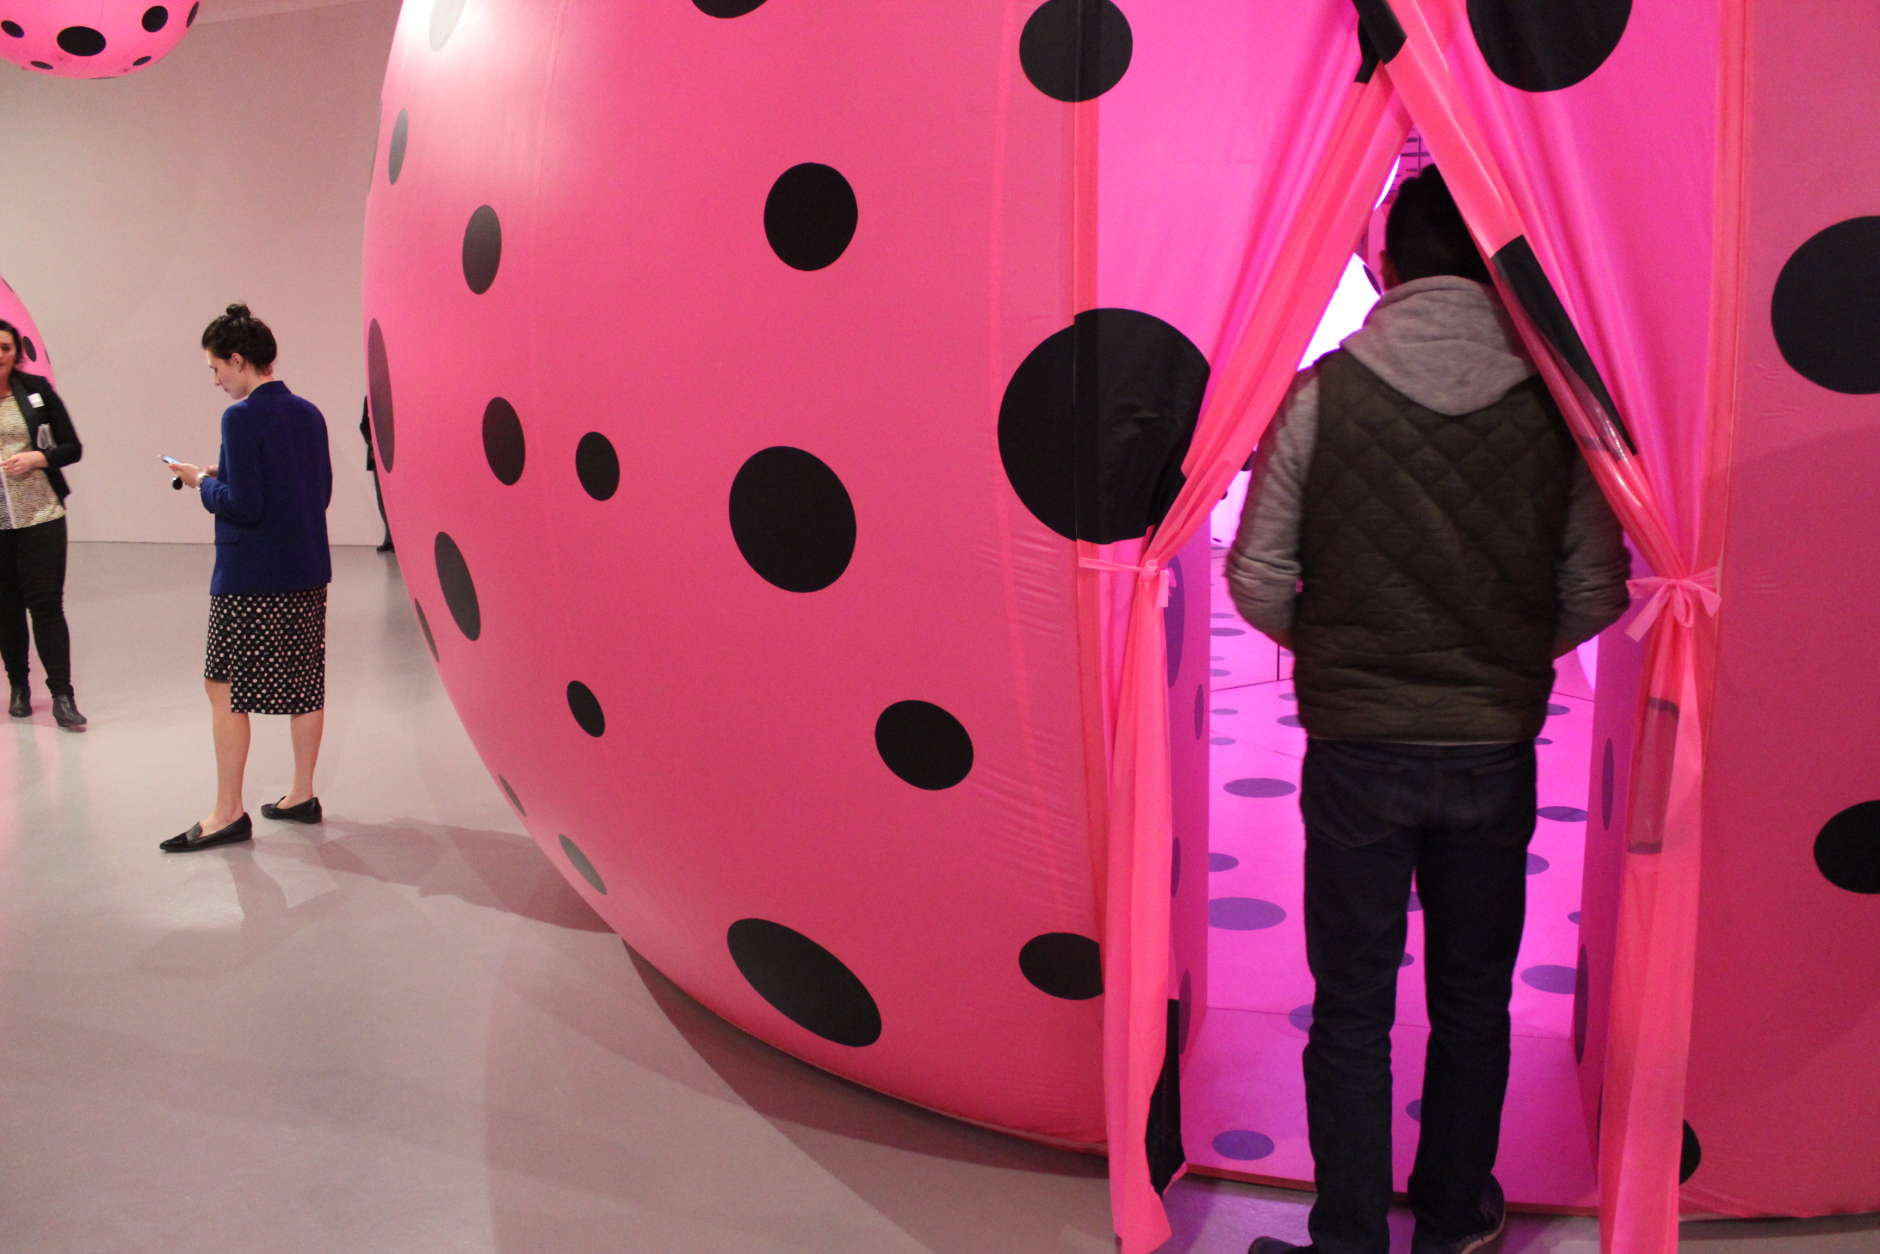 The entrance into one of the mirrored rooms where visitors will find a series of spotted pink orbs. (WTOP/Megan Cloherty)